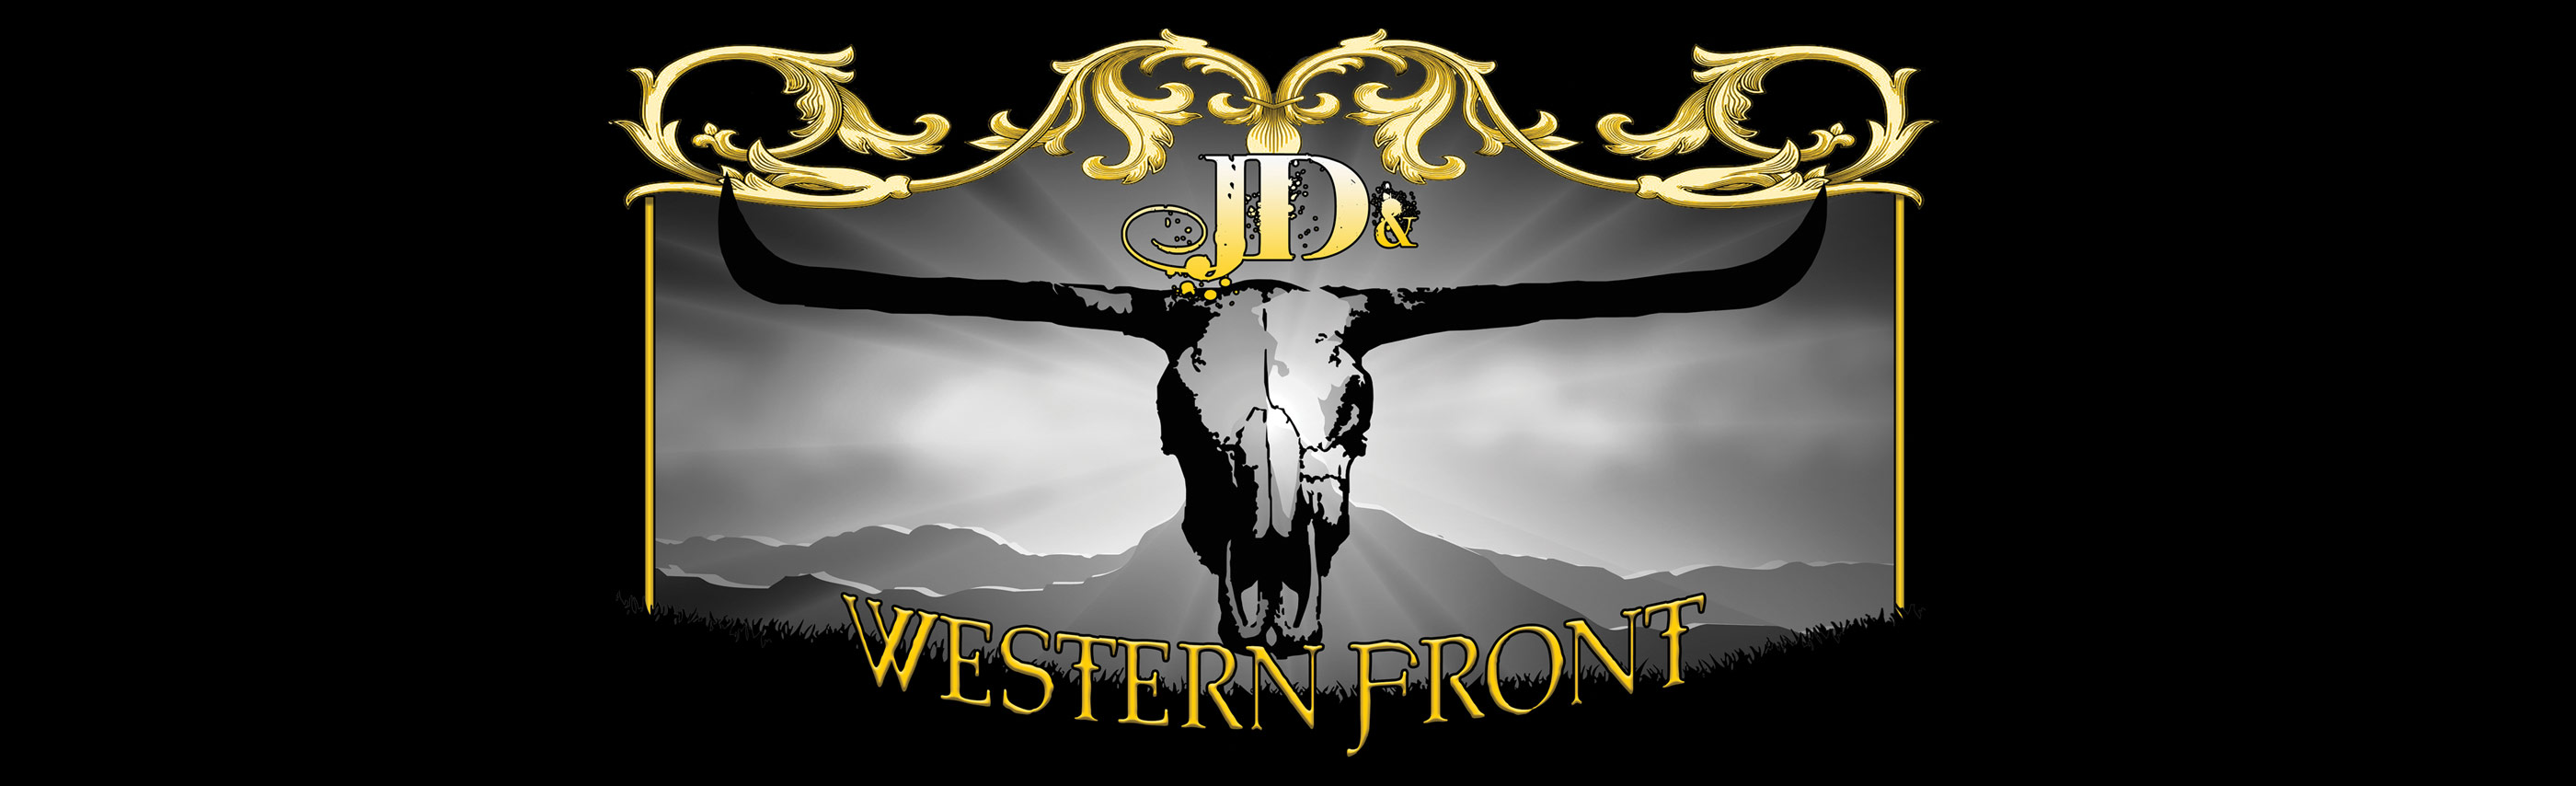 JD & The Western Front